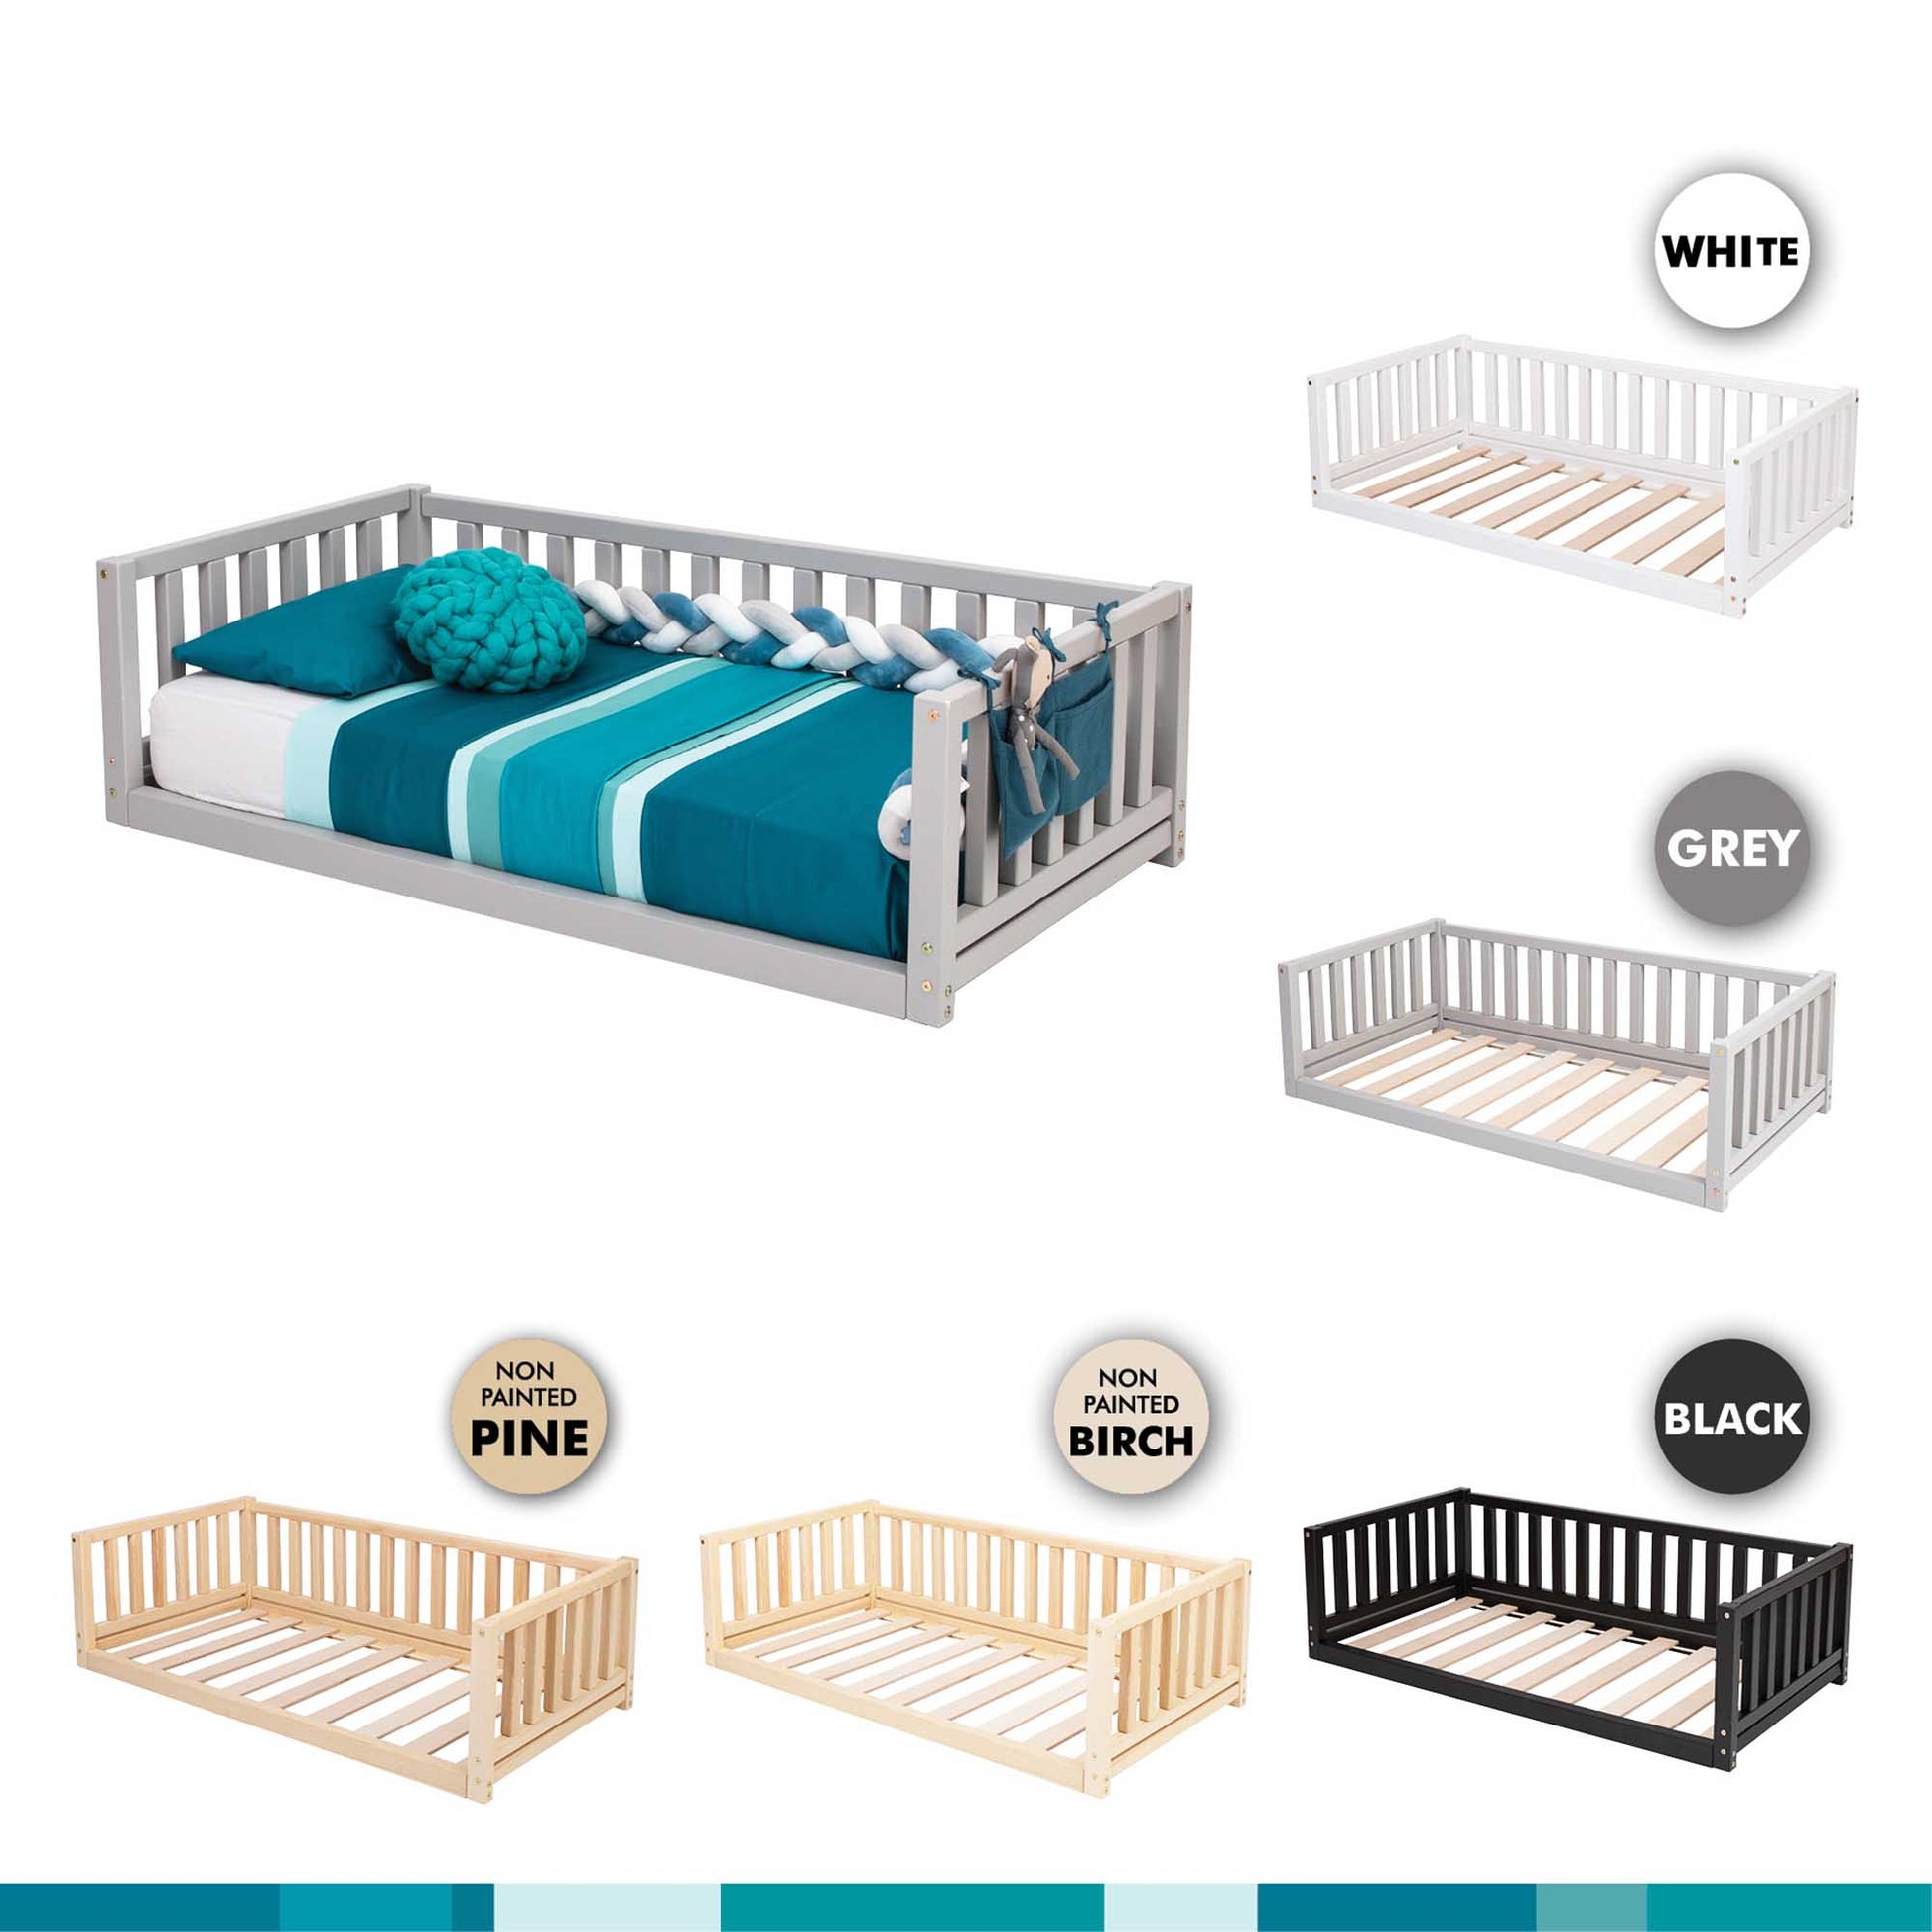 A floor-level bed with solid pine or birch wood slats available in various colors and styles. Perfect for children, the Sweet Home From Wood 2-in-1 toddler bed on legs with a 3-sided vertical rail can transition from a toddler bed to.